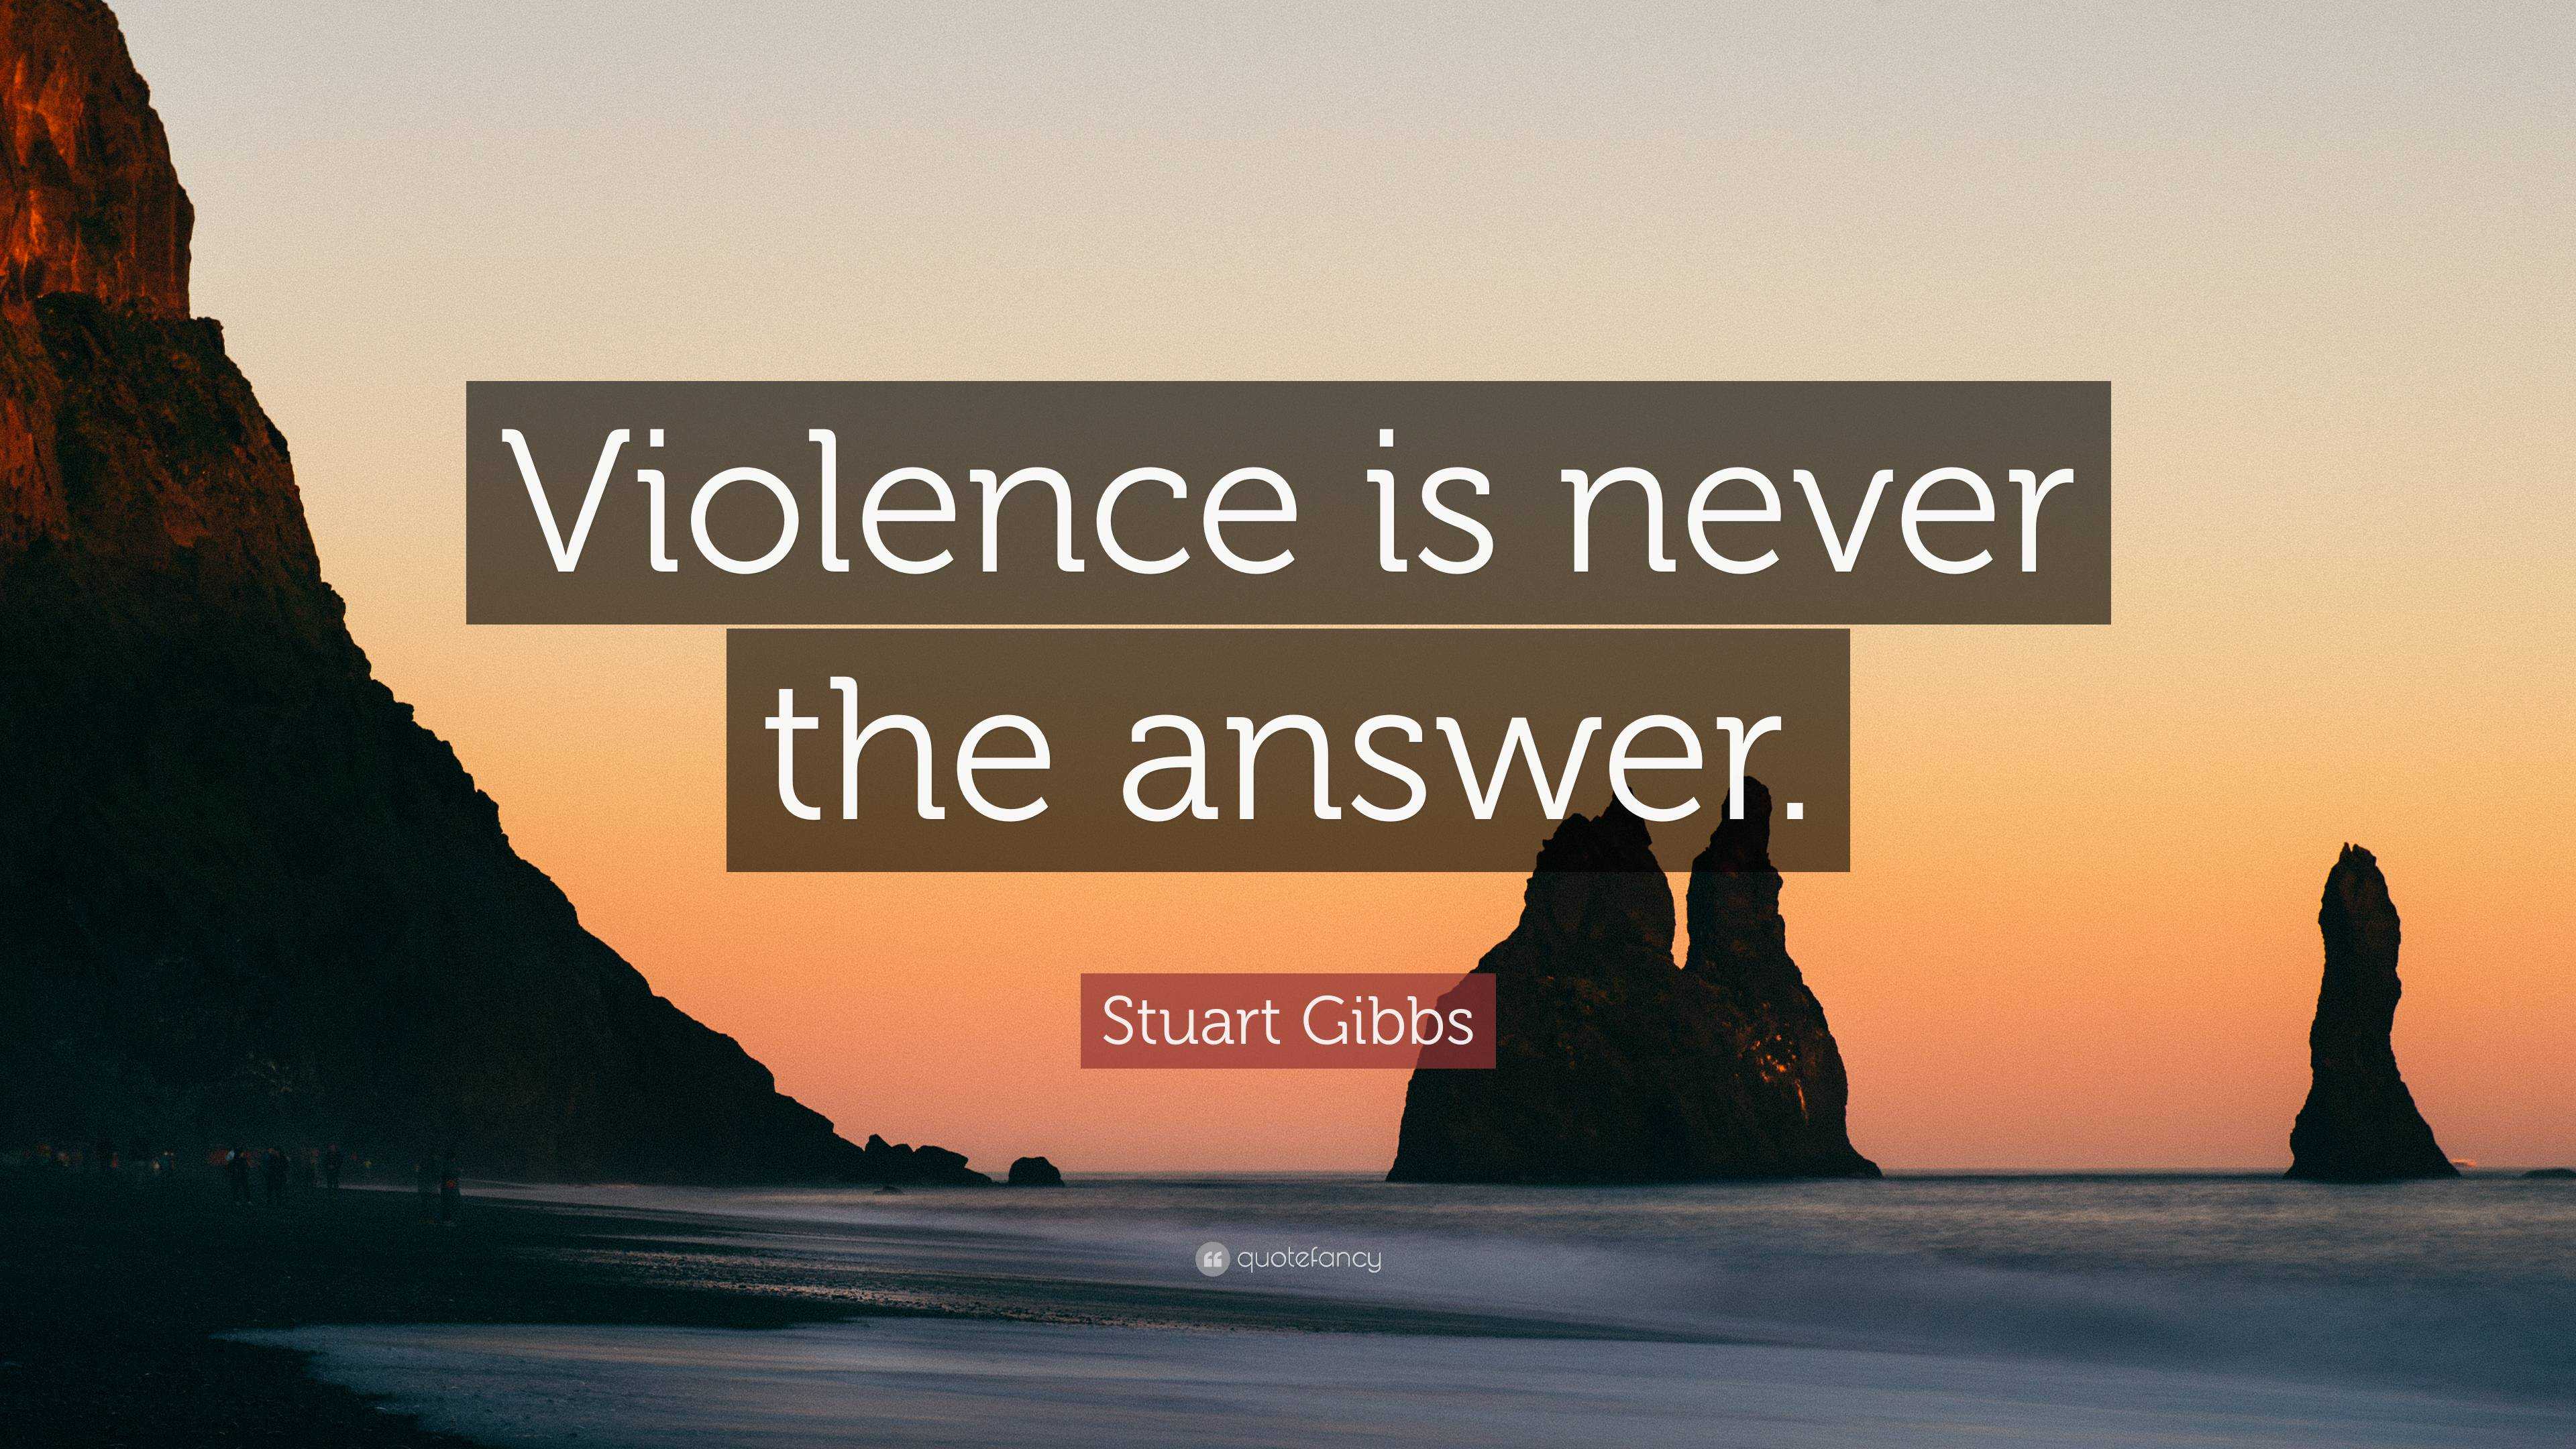 speech on violence is not the answer